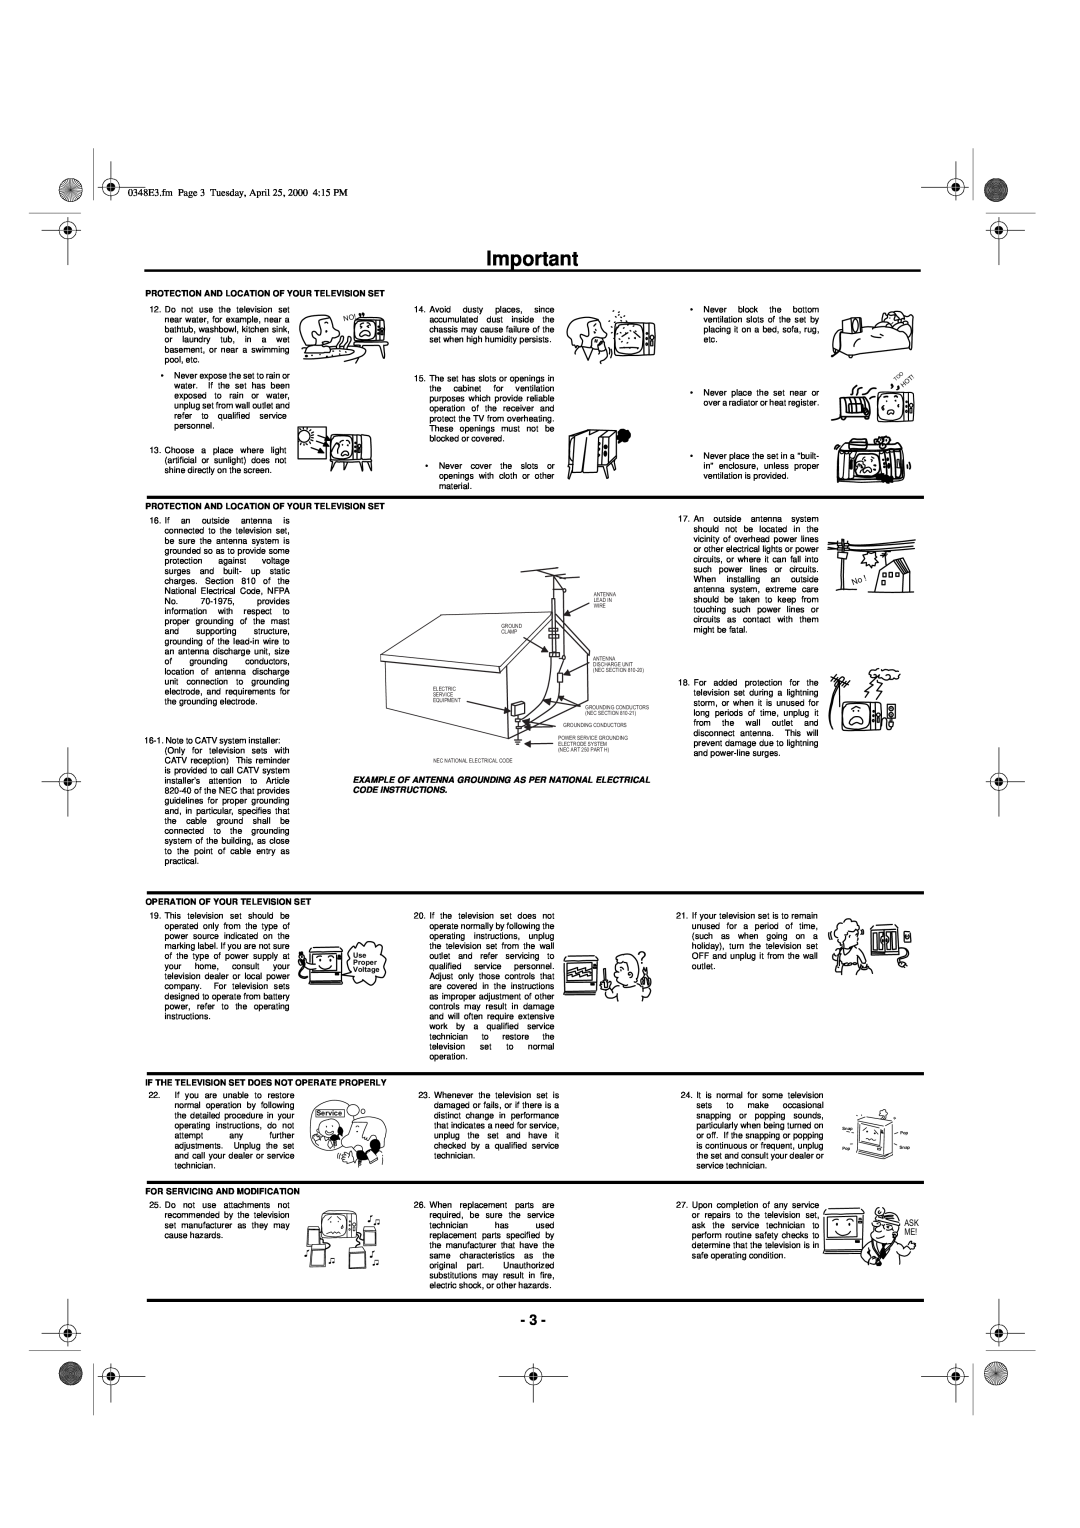 Hitachi 27UX01B manual 0348E3.fm Page 3 Tuesday, April 25, 2000 415 PM, Protection And Location Of Your Television Set 